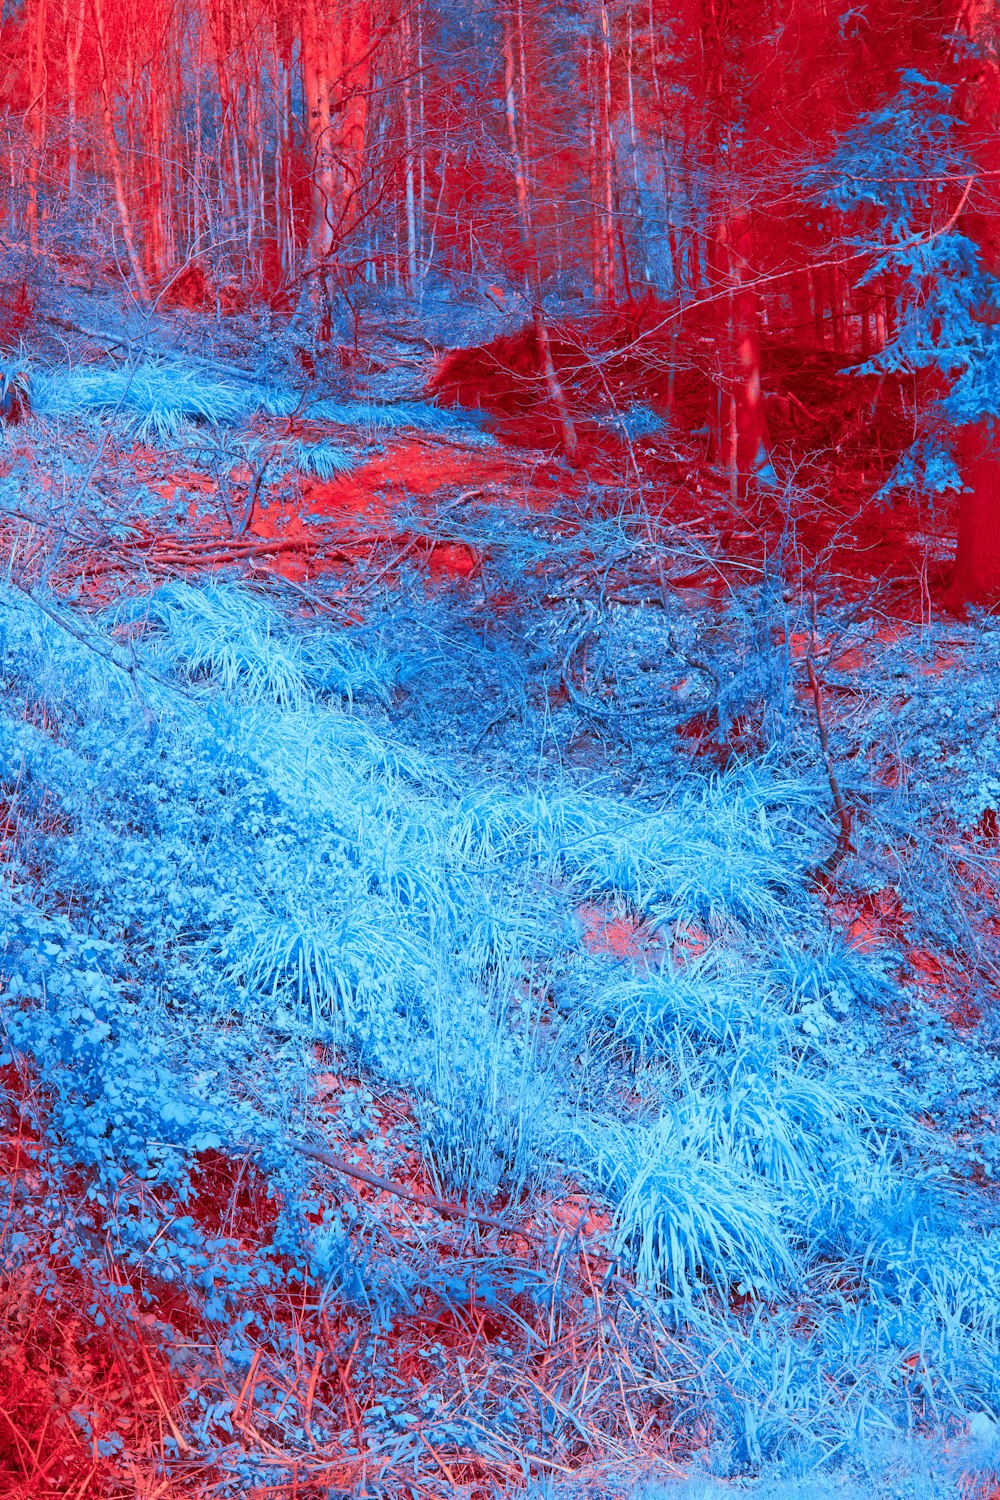 a red and blue painting of a path in the woods